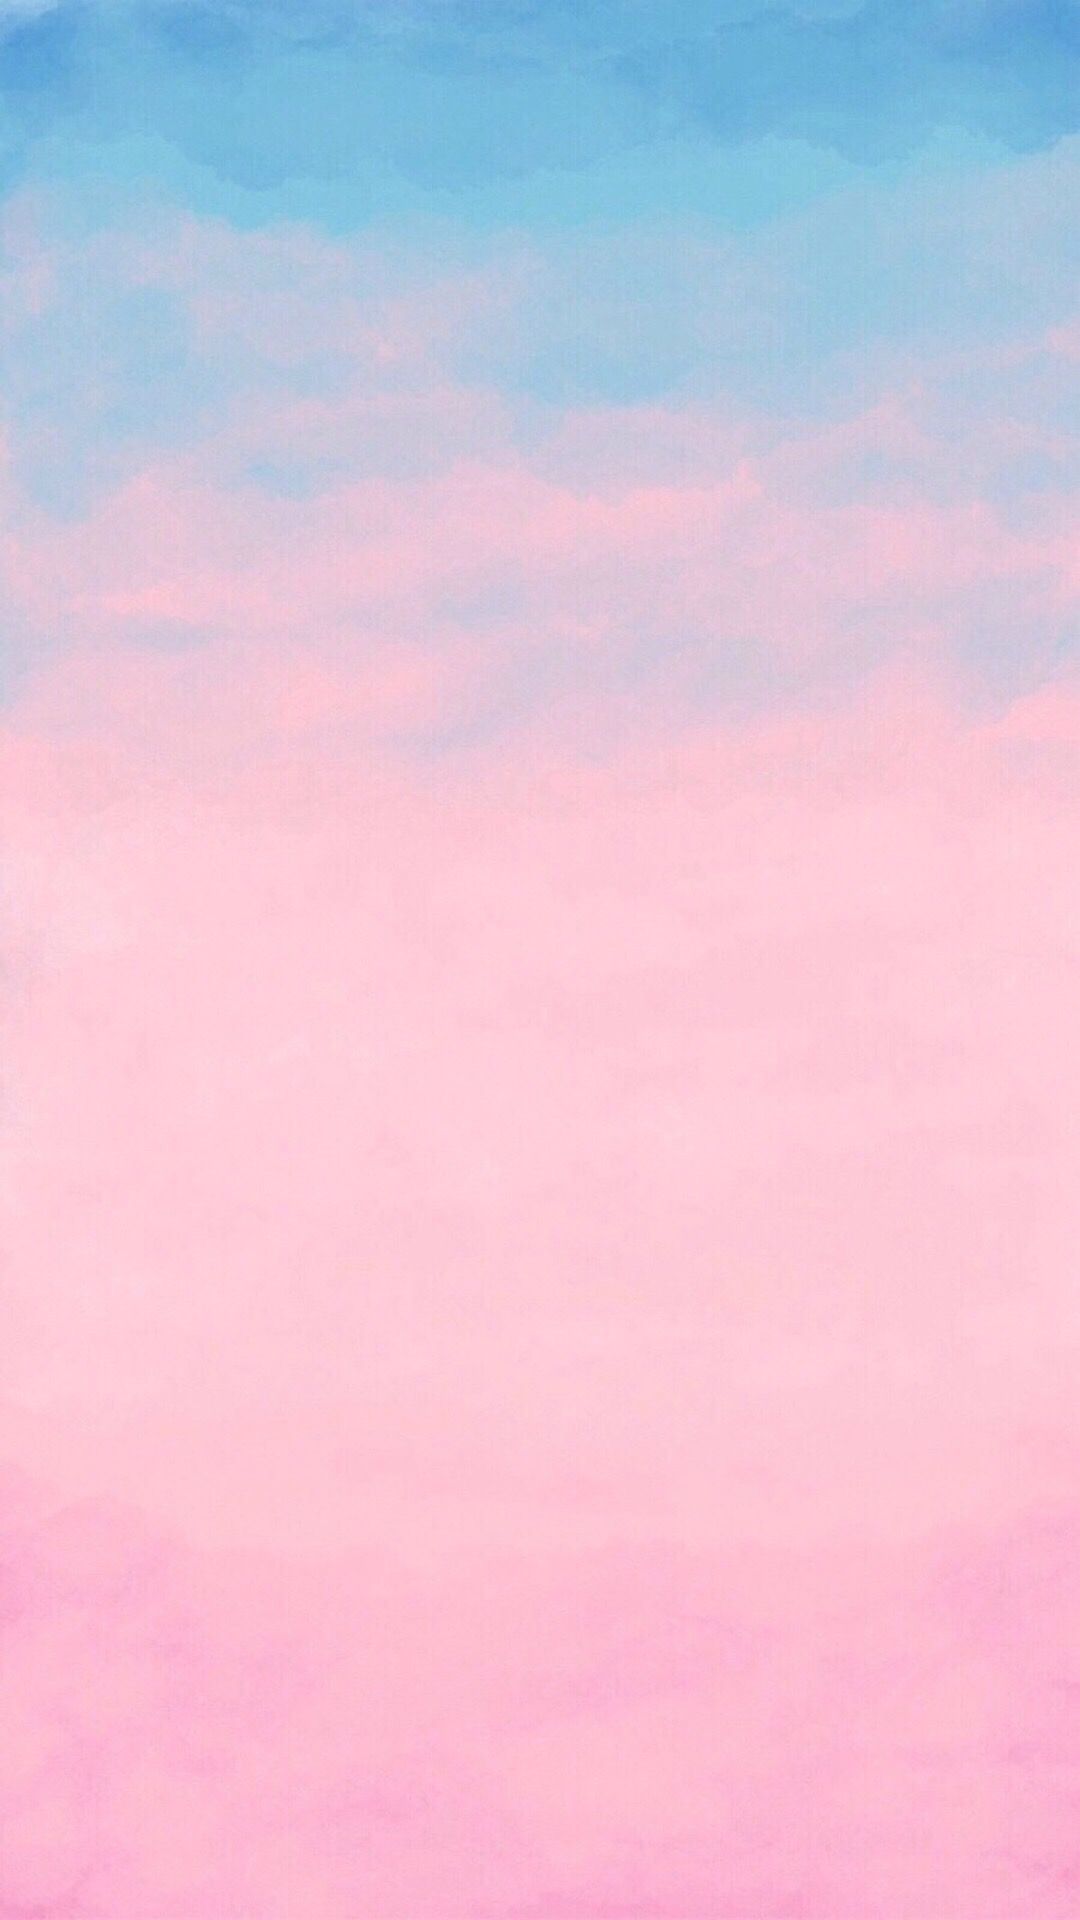  Wallpaper Warna Pink  Pastel Pink  And Blue Background 